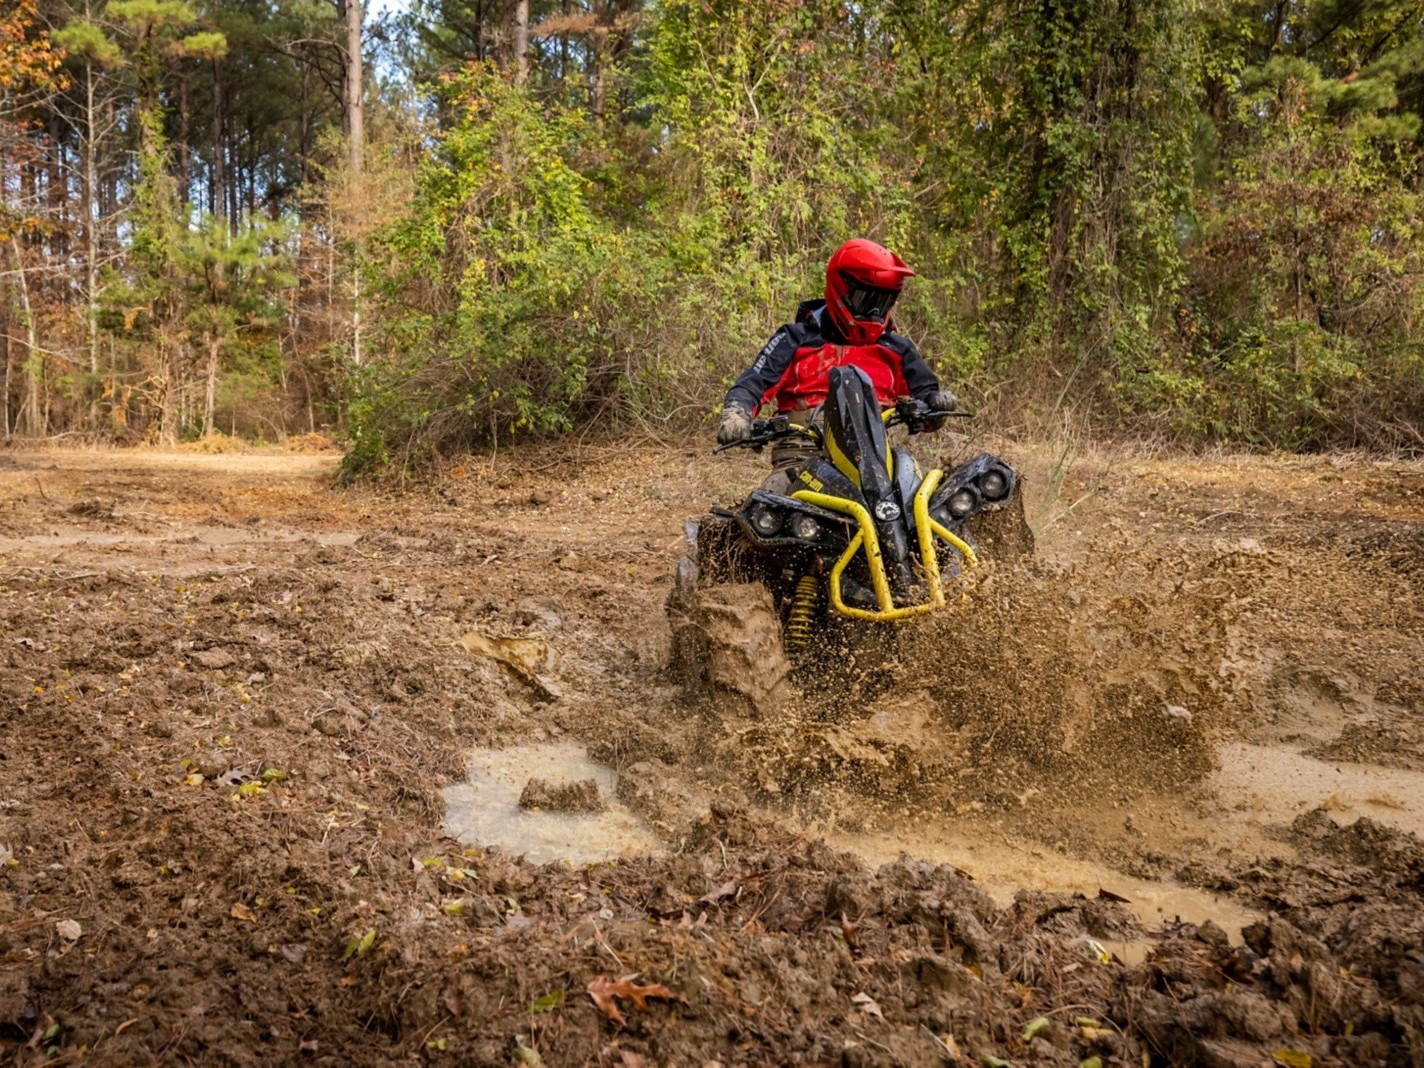 Osta Cruiser dressed in Finntrail mud gear, ripping up the mud on his yellow Can-Am Renegade X MR